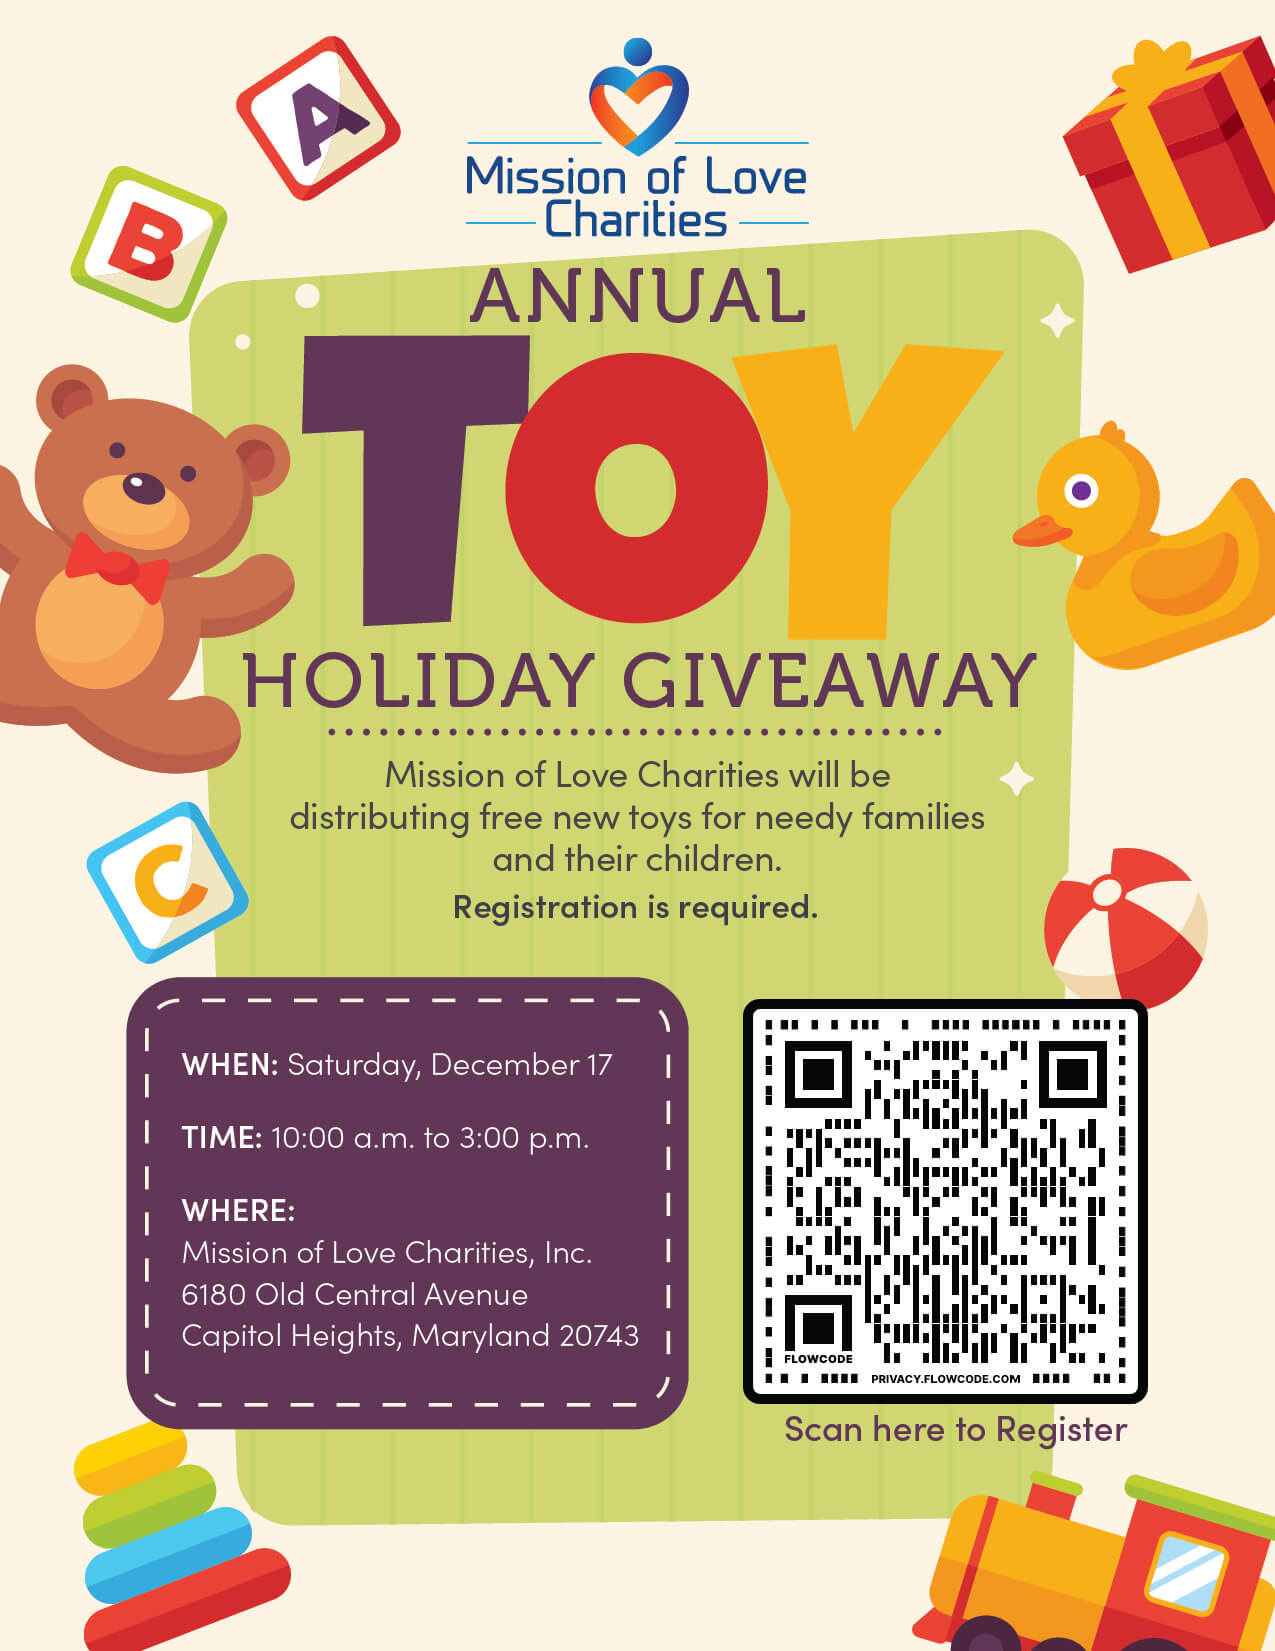 Annual Toy Holiday Giveaway Mission of Love Charities, Inc.